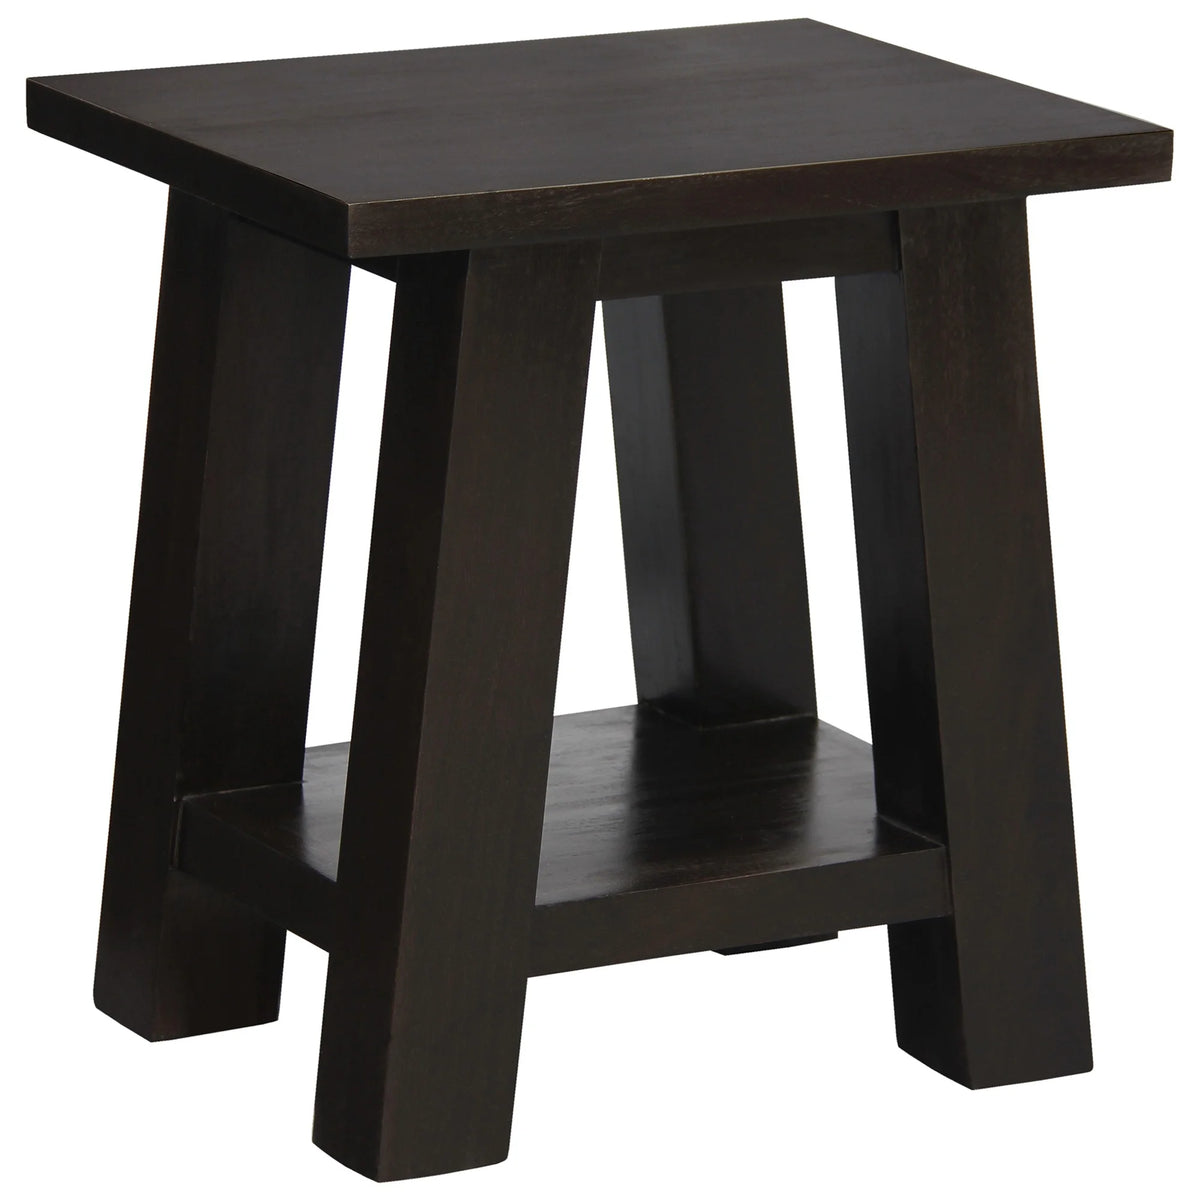 Zimra Solid Timber Lamp Table - Chocolate - Notbrand